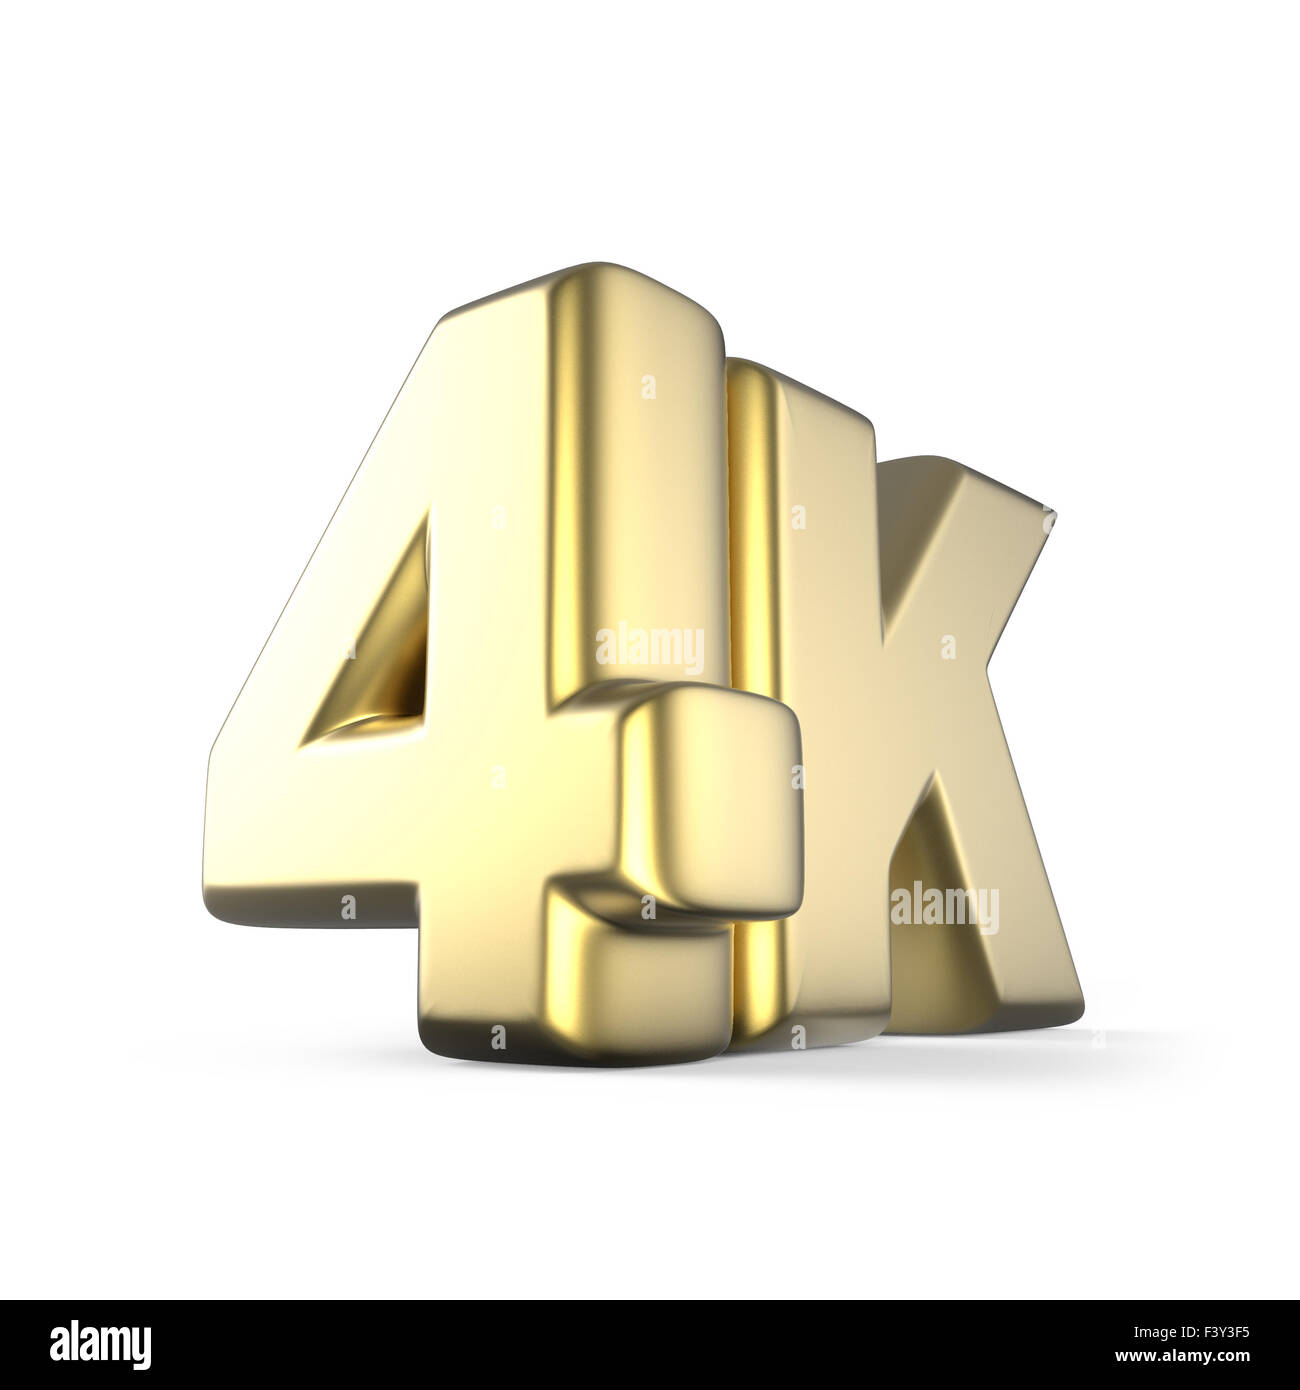 Ultra 4K resolution technology concept. 3D render illustration isolated on white background Stock Photo